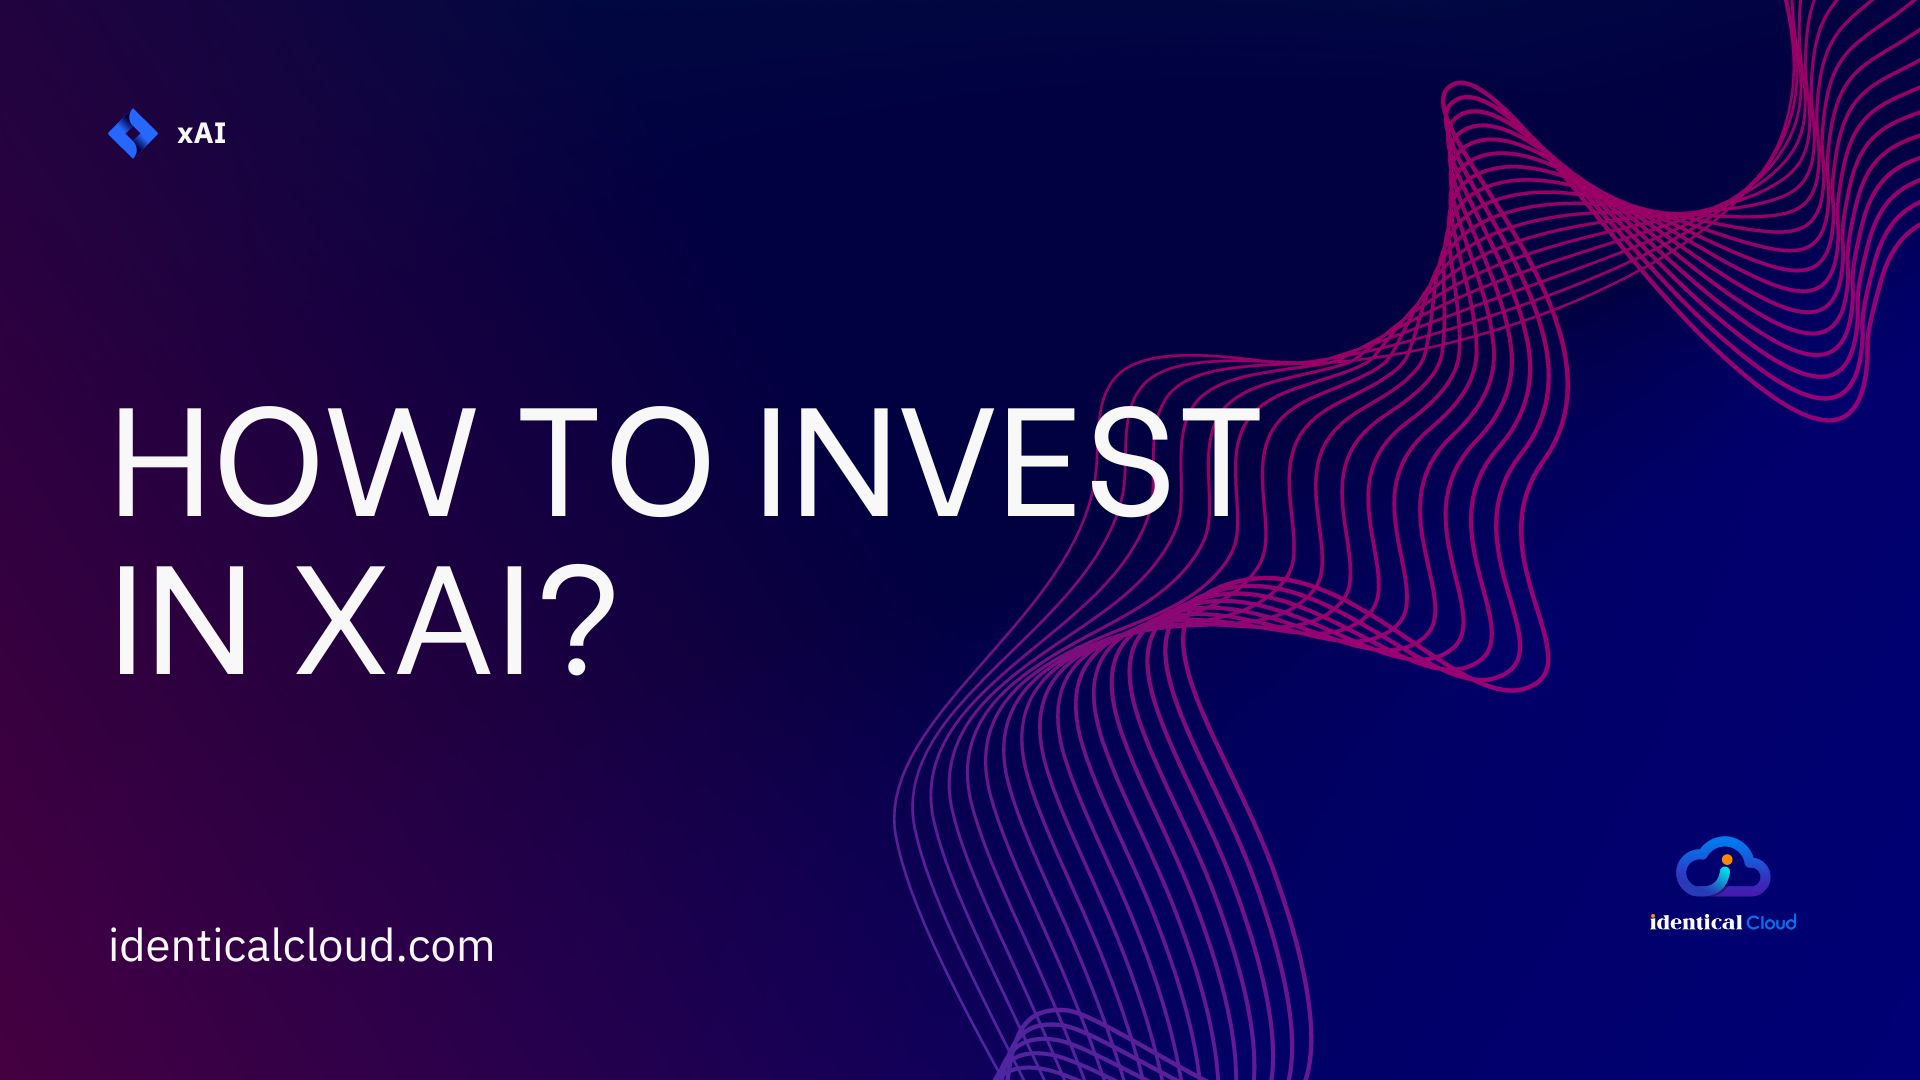 How to invest in xAI? - identicalcloud.com